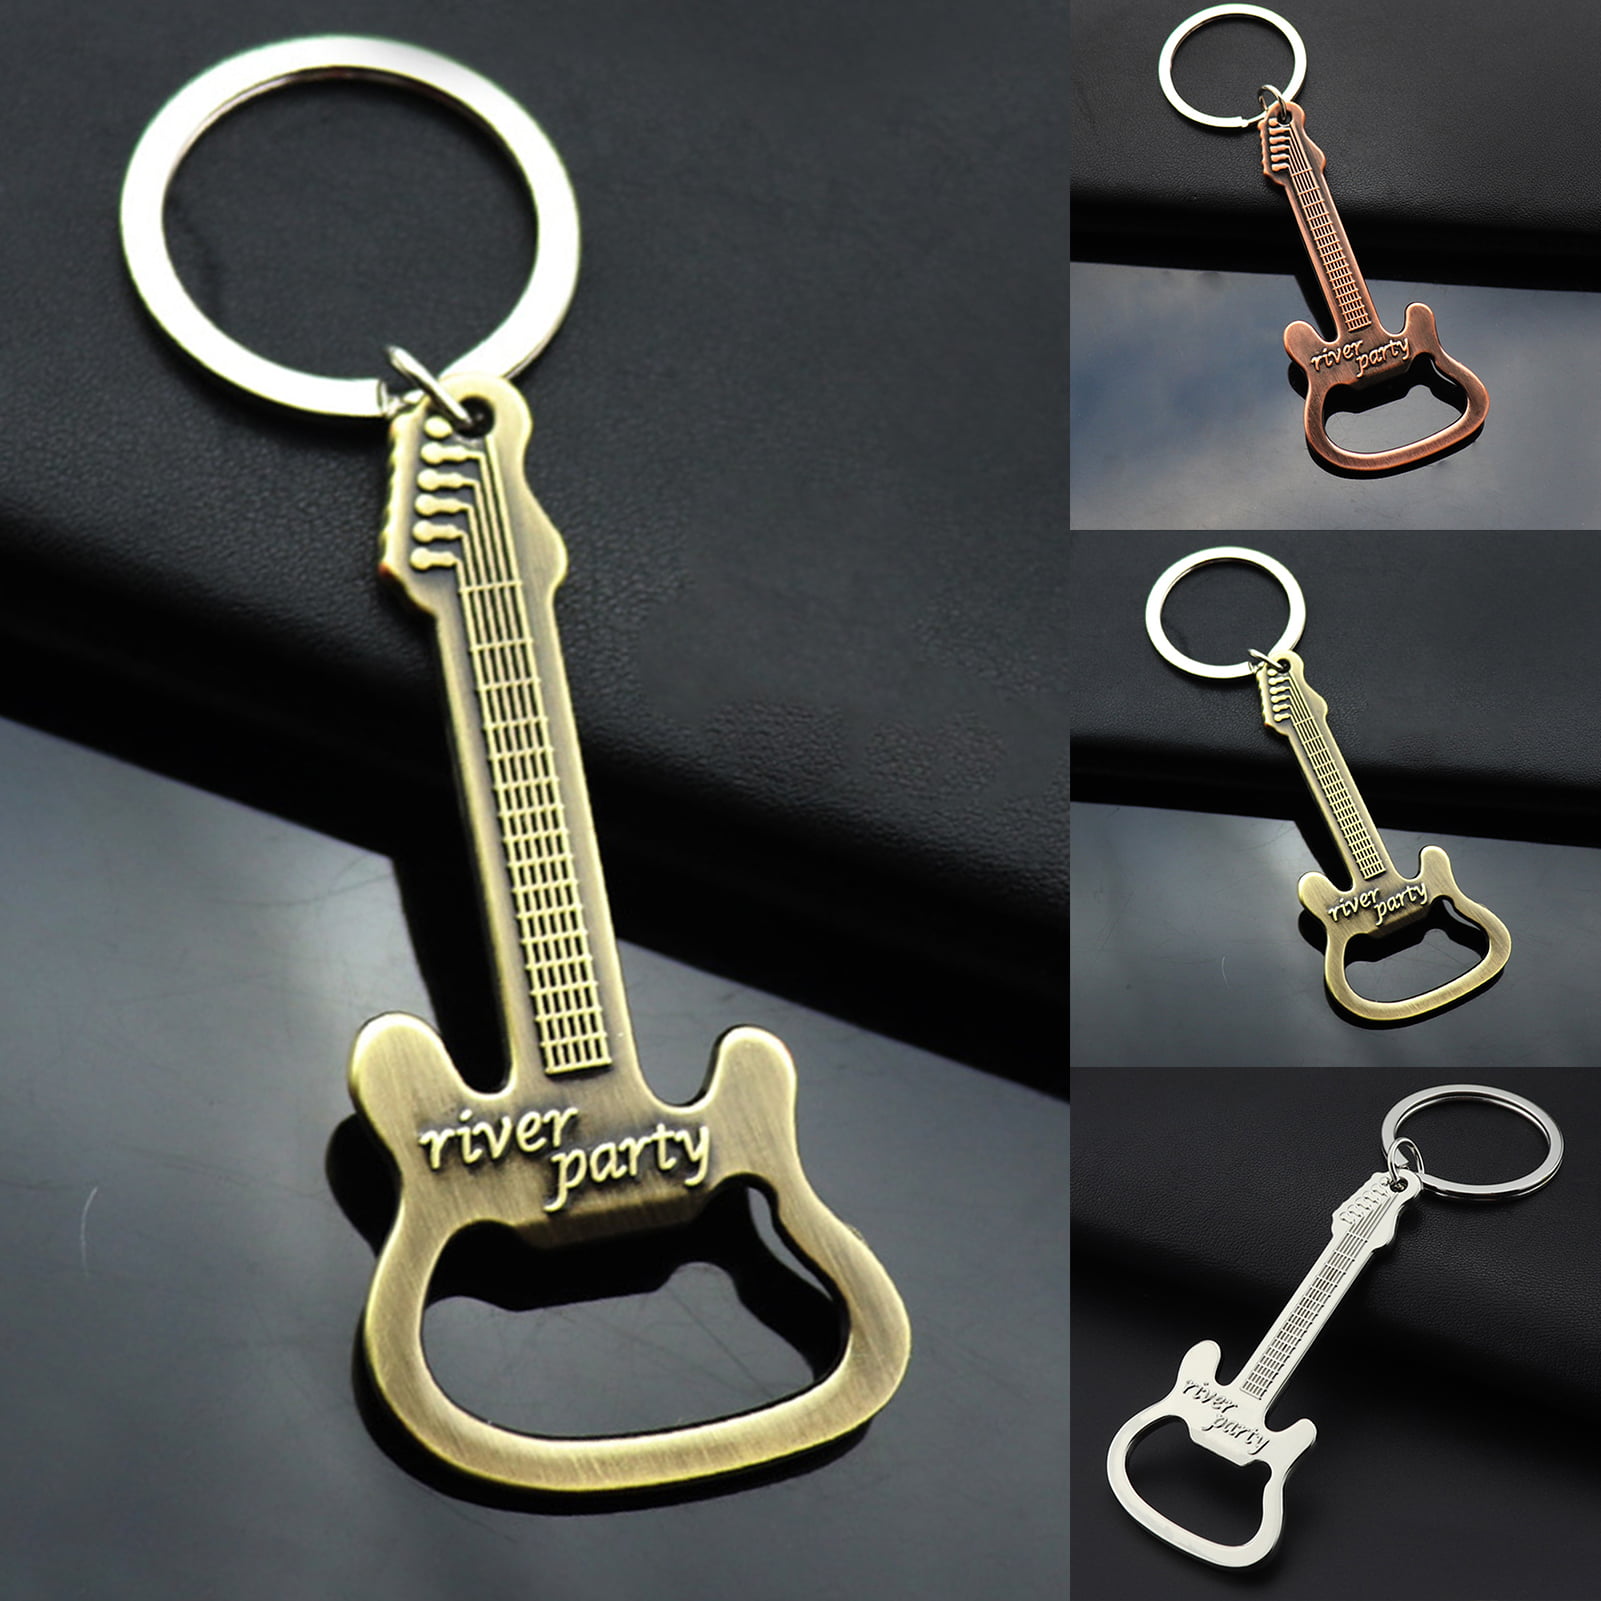 GUITAR Bottle Opener KeY CHAIN  RIVER PARTY  Color New in bag 